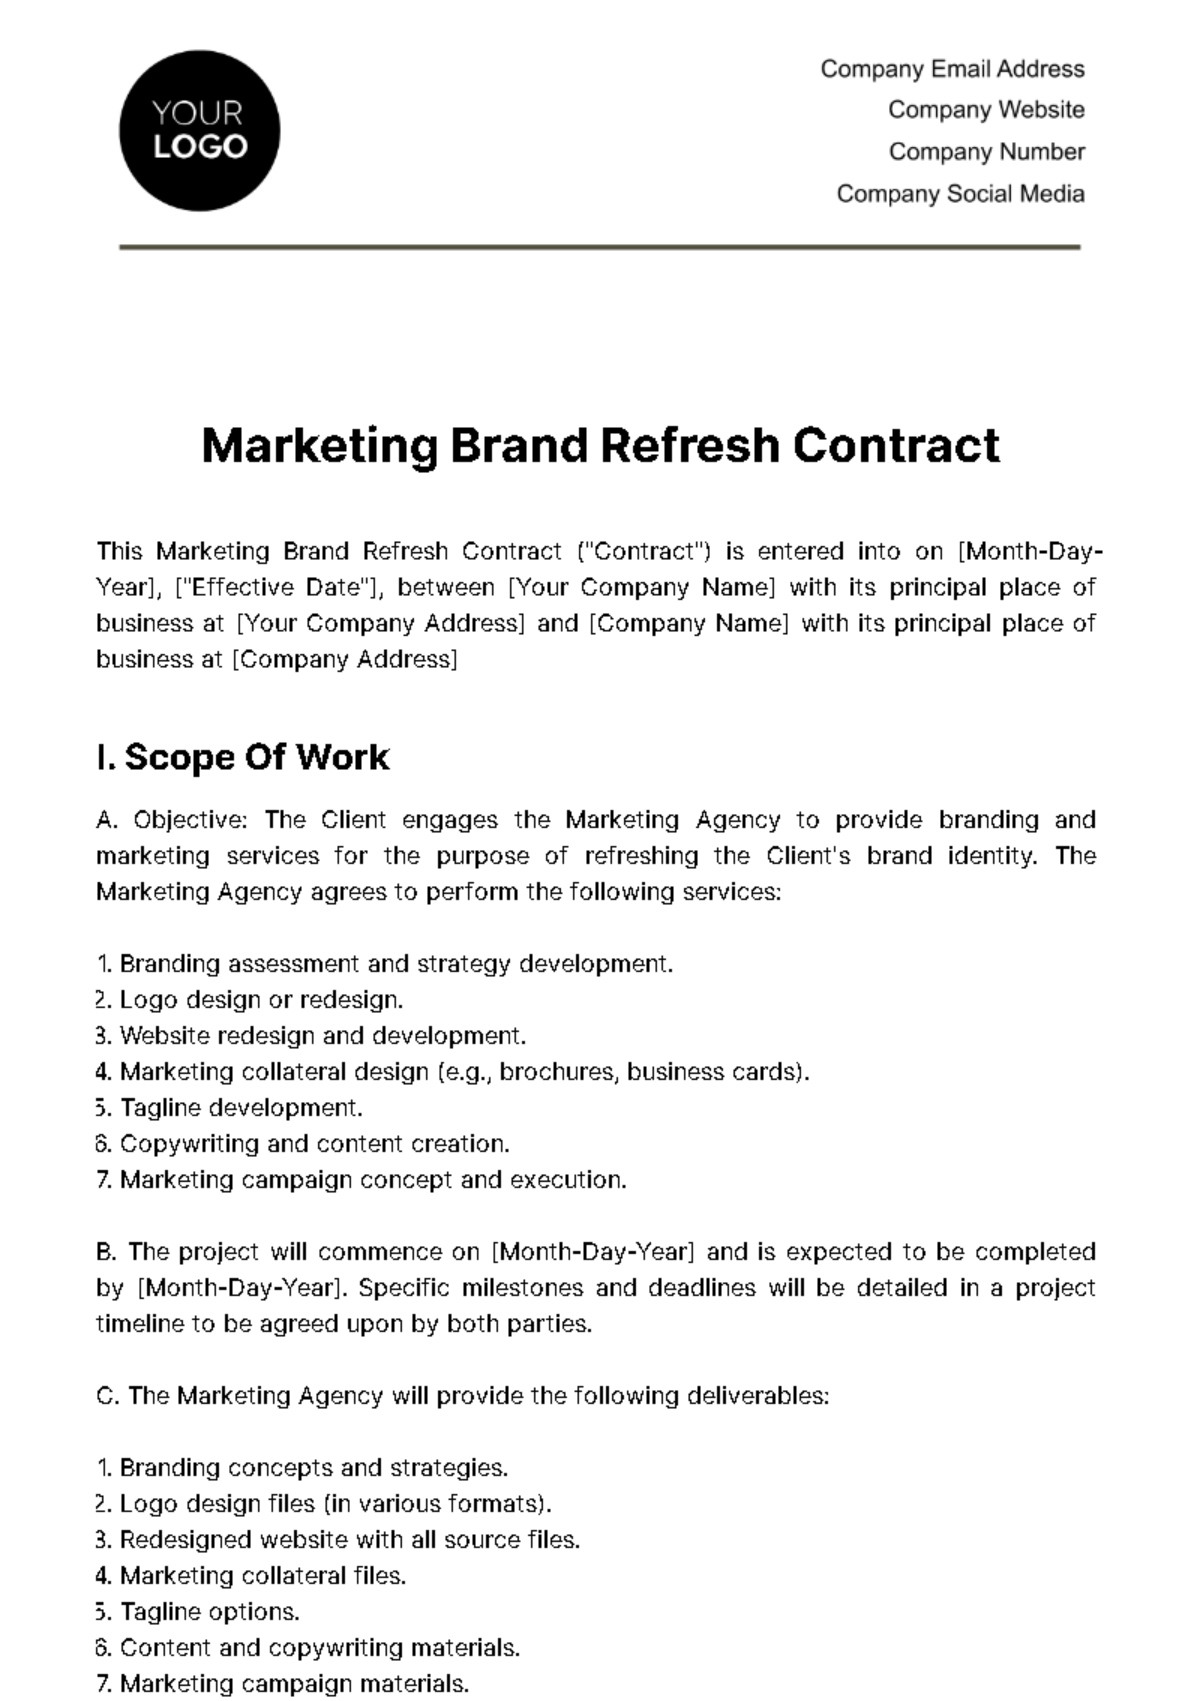 Marketing Brand Refresh Contract Template